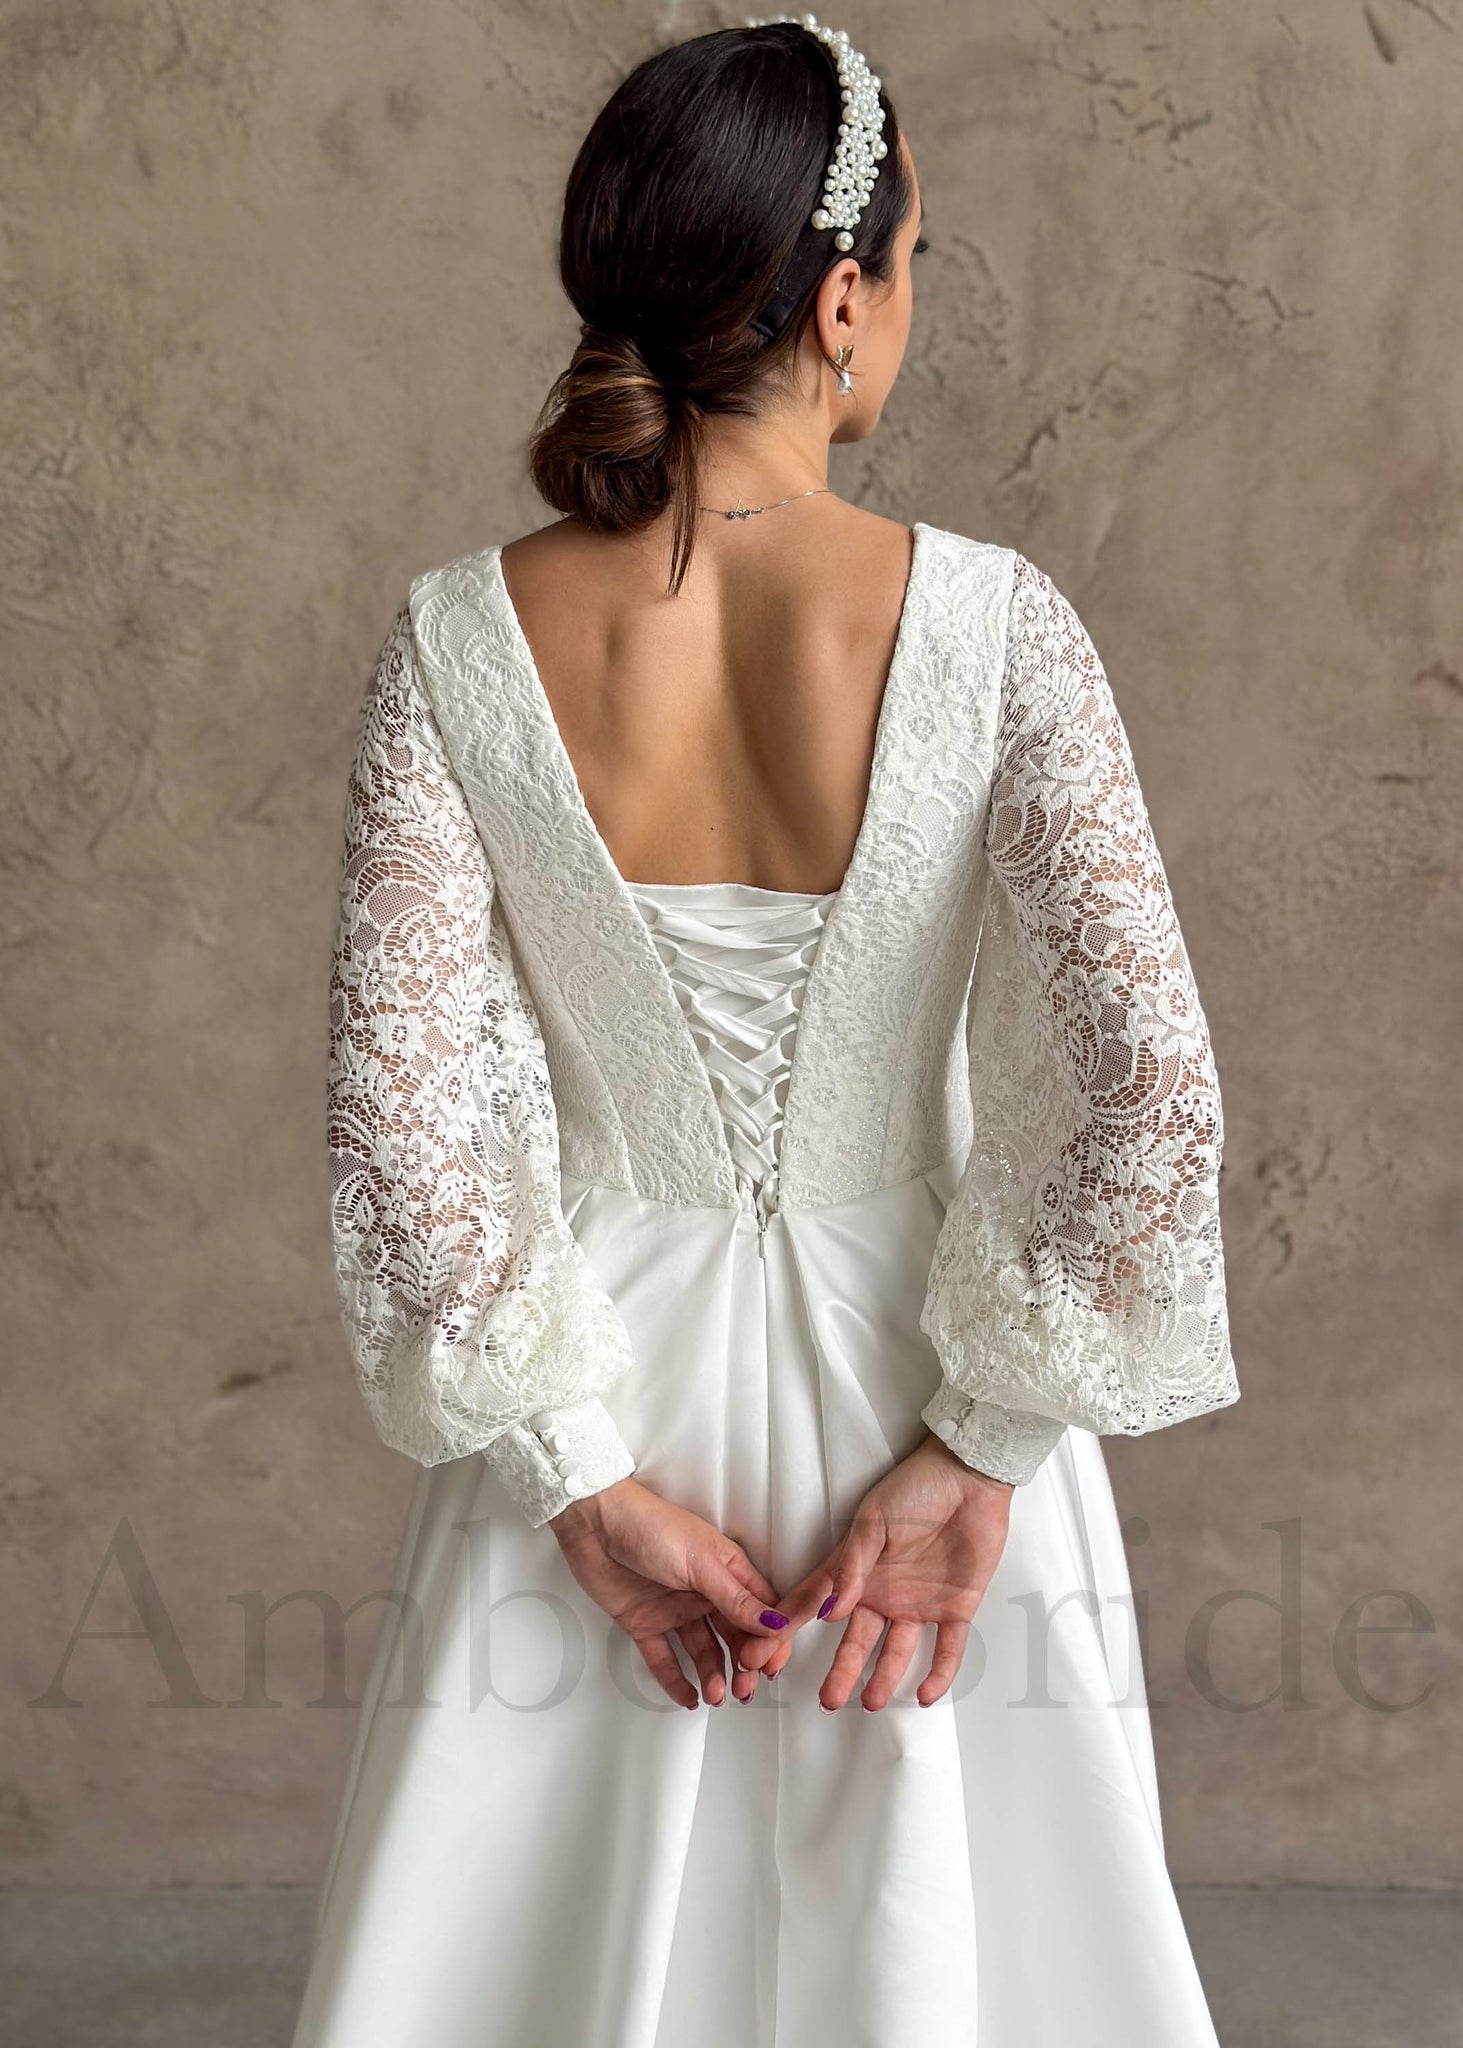 Boho A-Line Satin Wedding Dress with Deep V Neck and Long Puffy Lace Sleeves